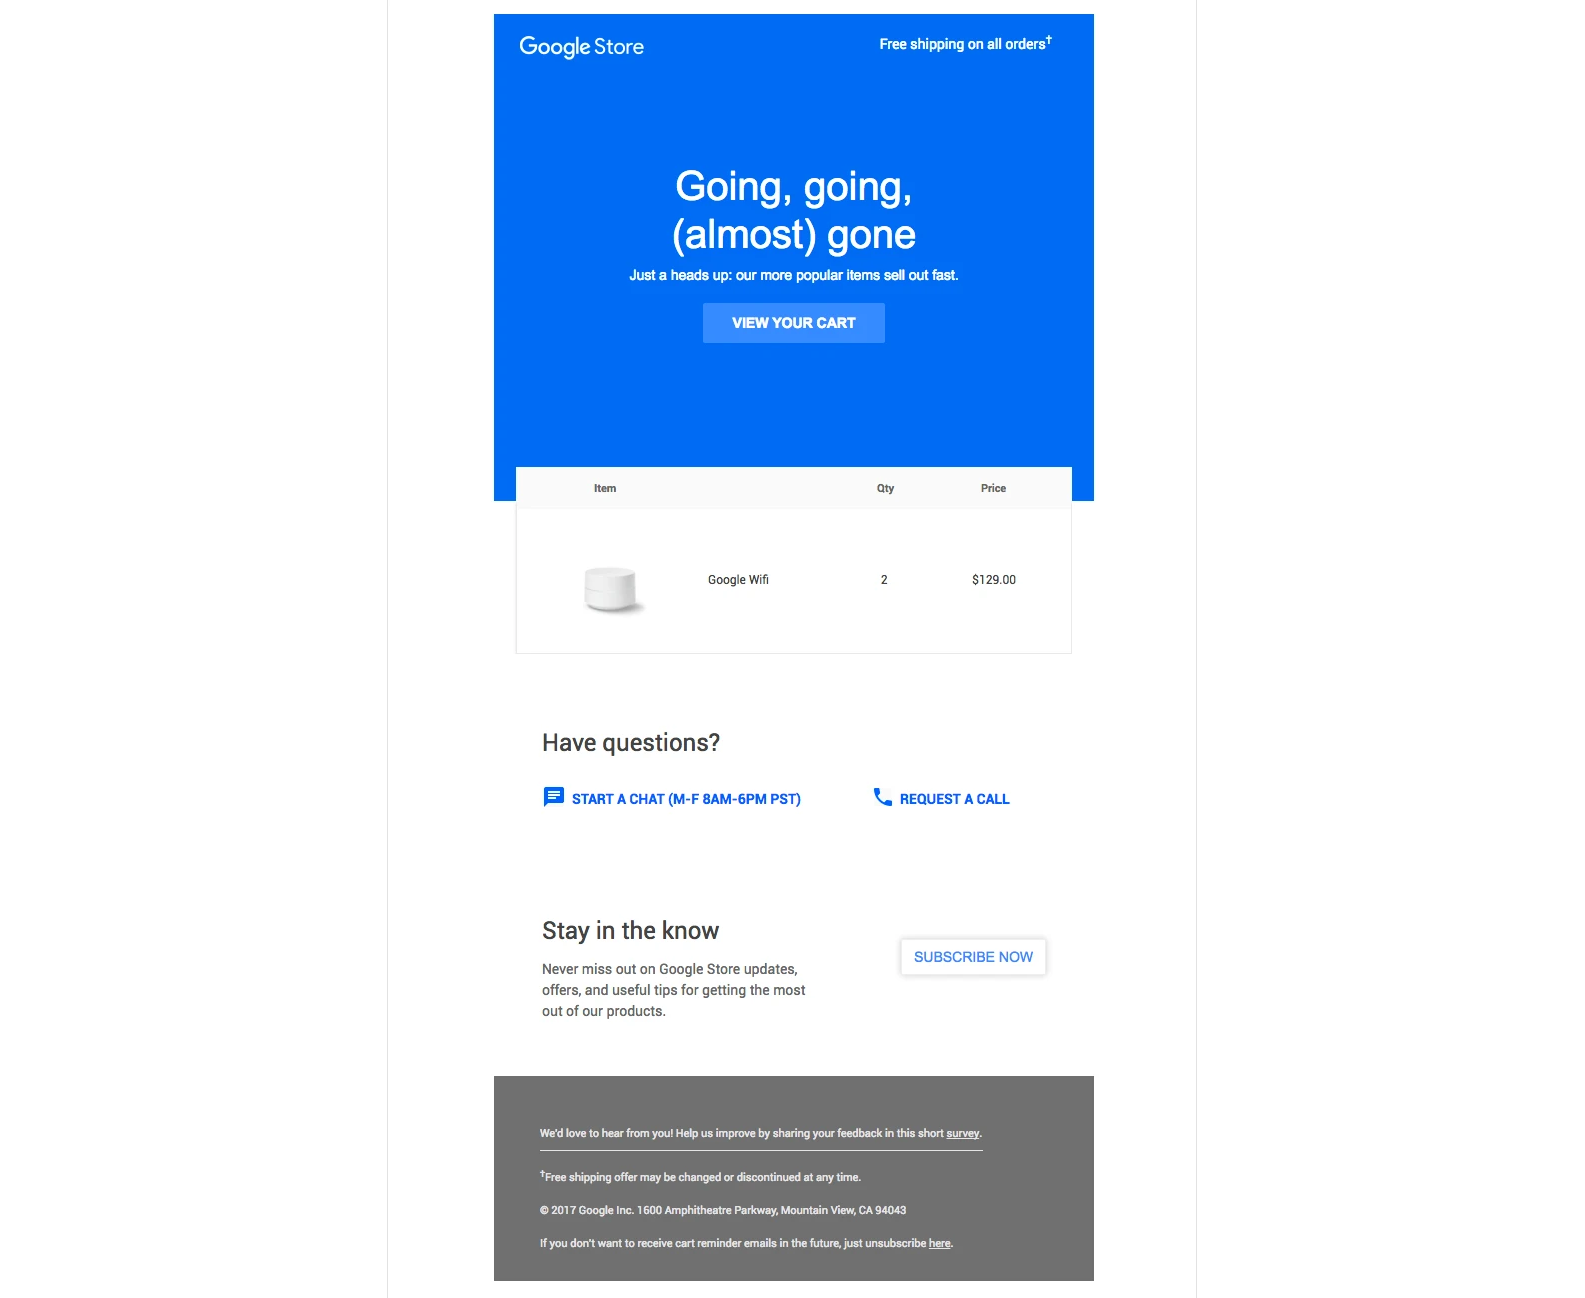 Drip email campaign for Cart Abandonment by Google